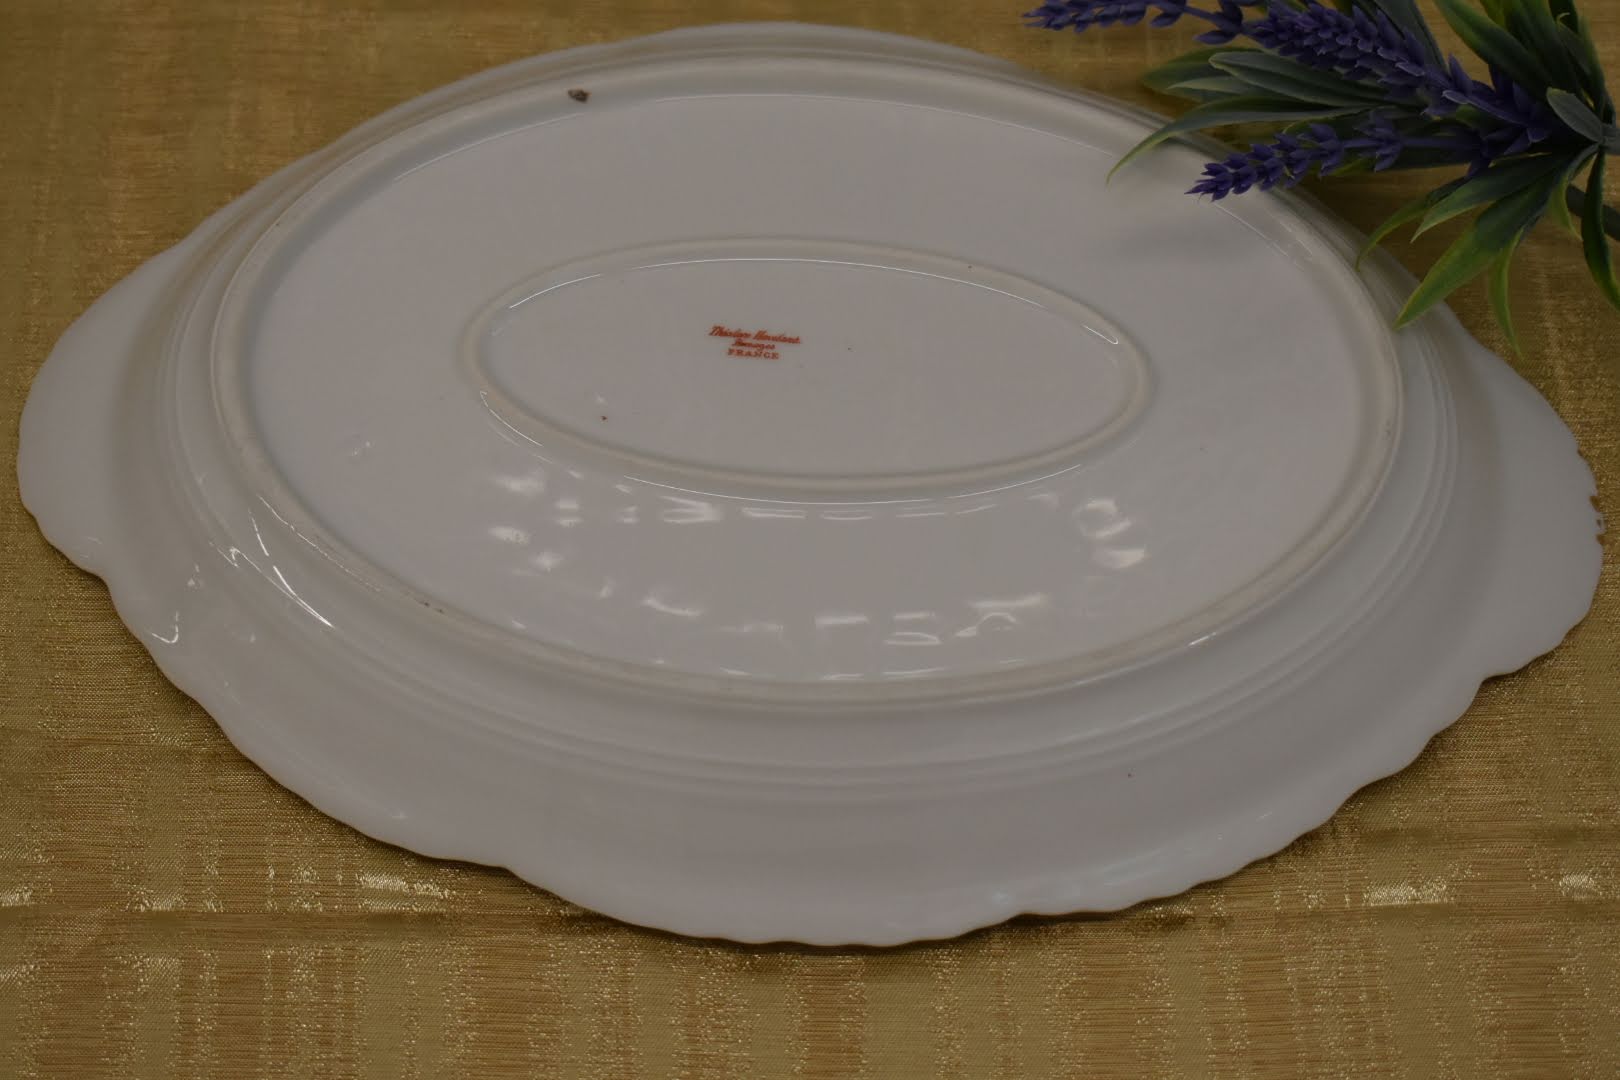 Limoges Theodore Haviland Fine Porcelain China -Mid Century Big Oval Platter - Blue White Green Floral Pattern - From France - Gold Trim